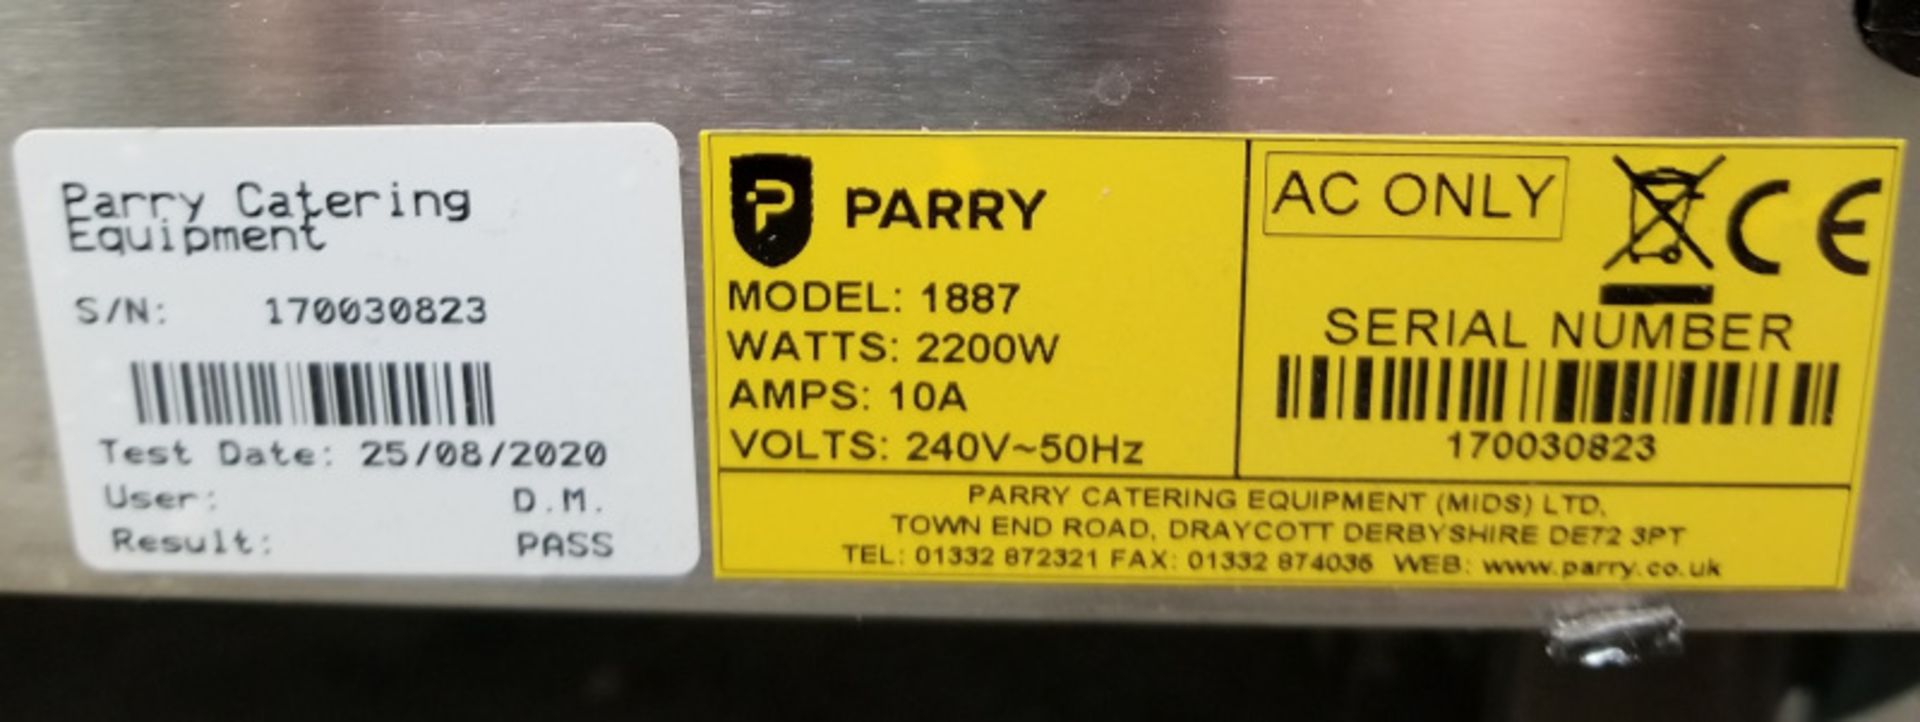 Parry Mobile Servery with containers - Model 1887 Serial No.170030823 - L870 x W620 x H940 - Image 6 of 10